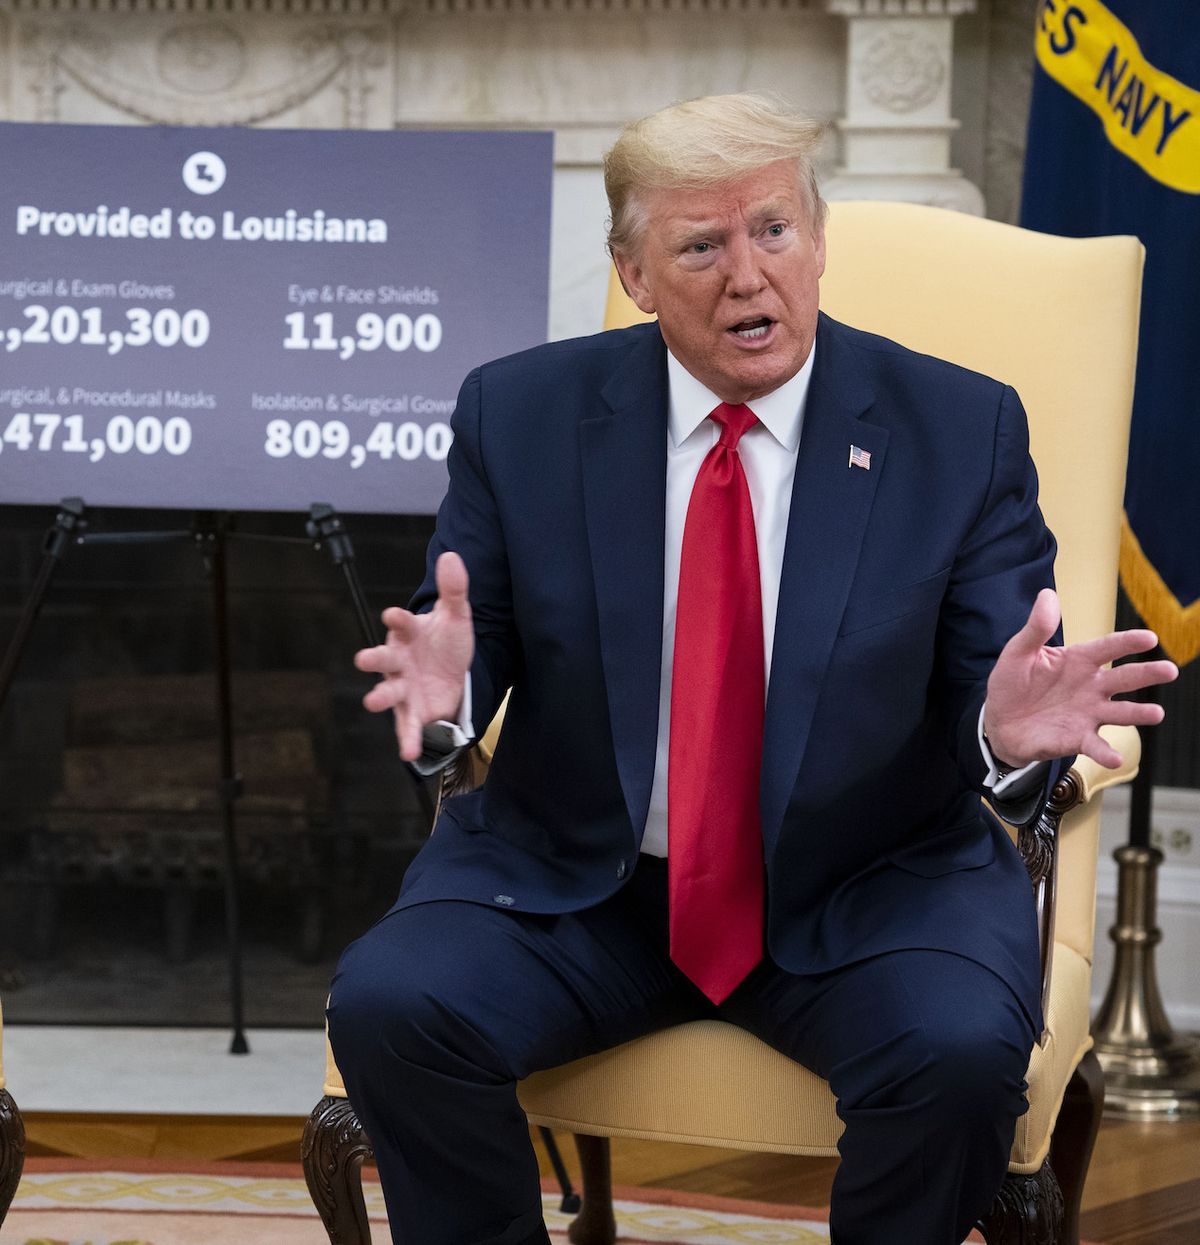 nytvirus   president donald trump makes remarks as he meets with louisiana governor john bel edwards in the oval office, wednesday, april 29, 2020   photo by doug millsthe new york times